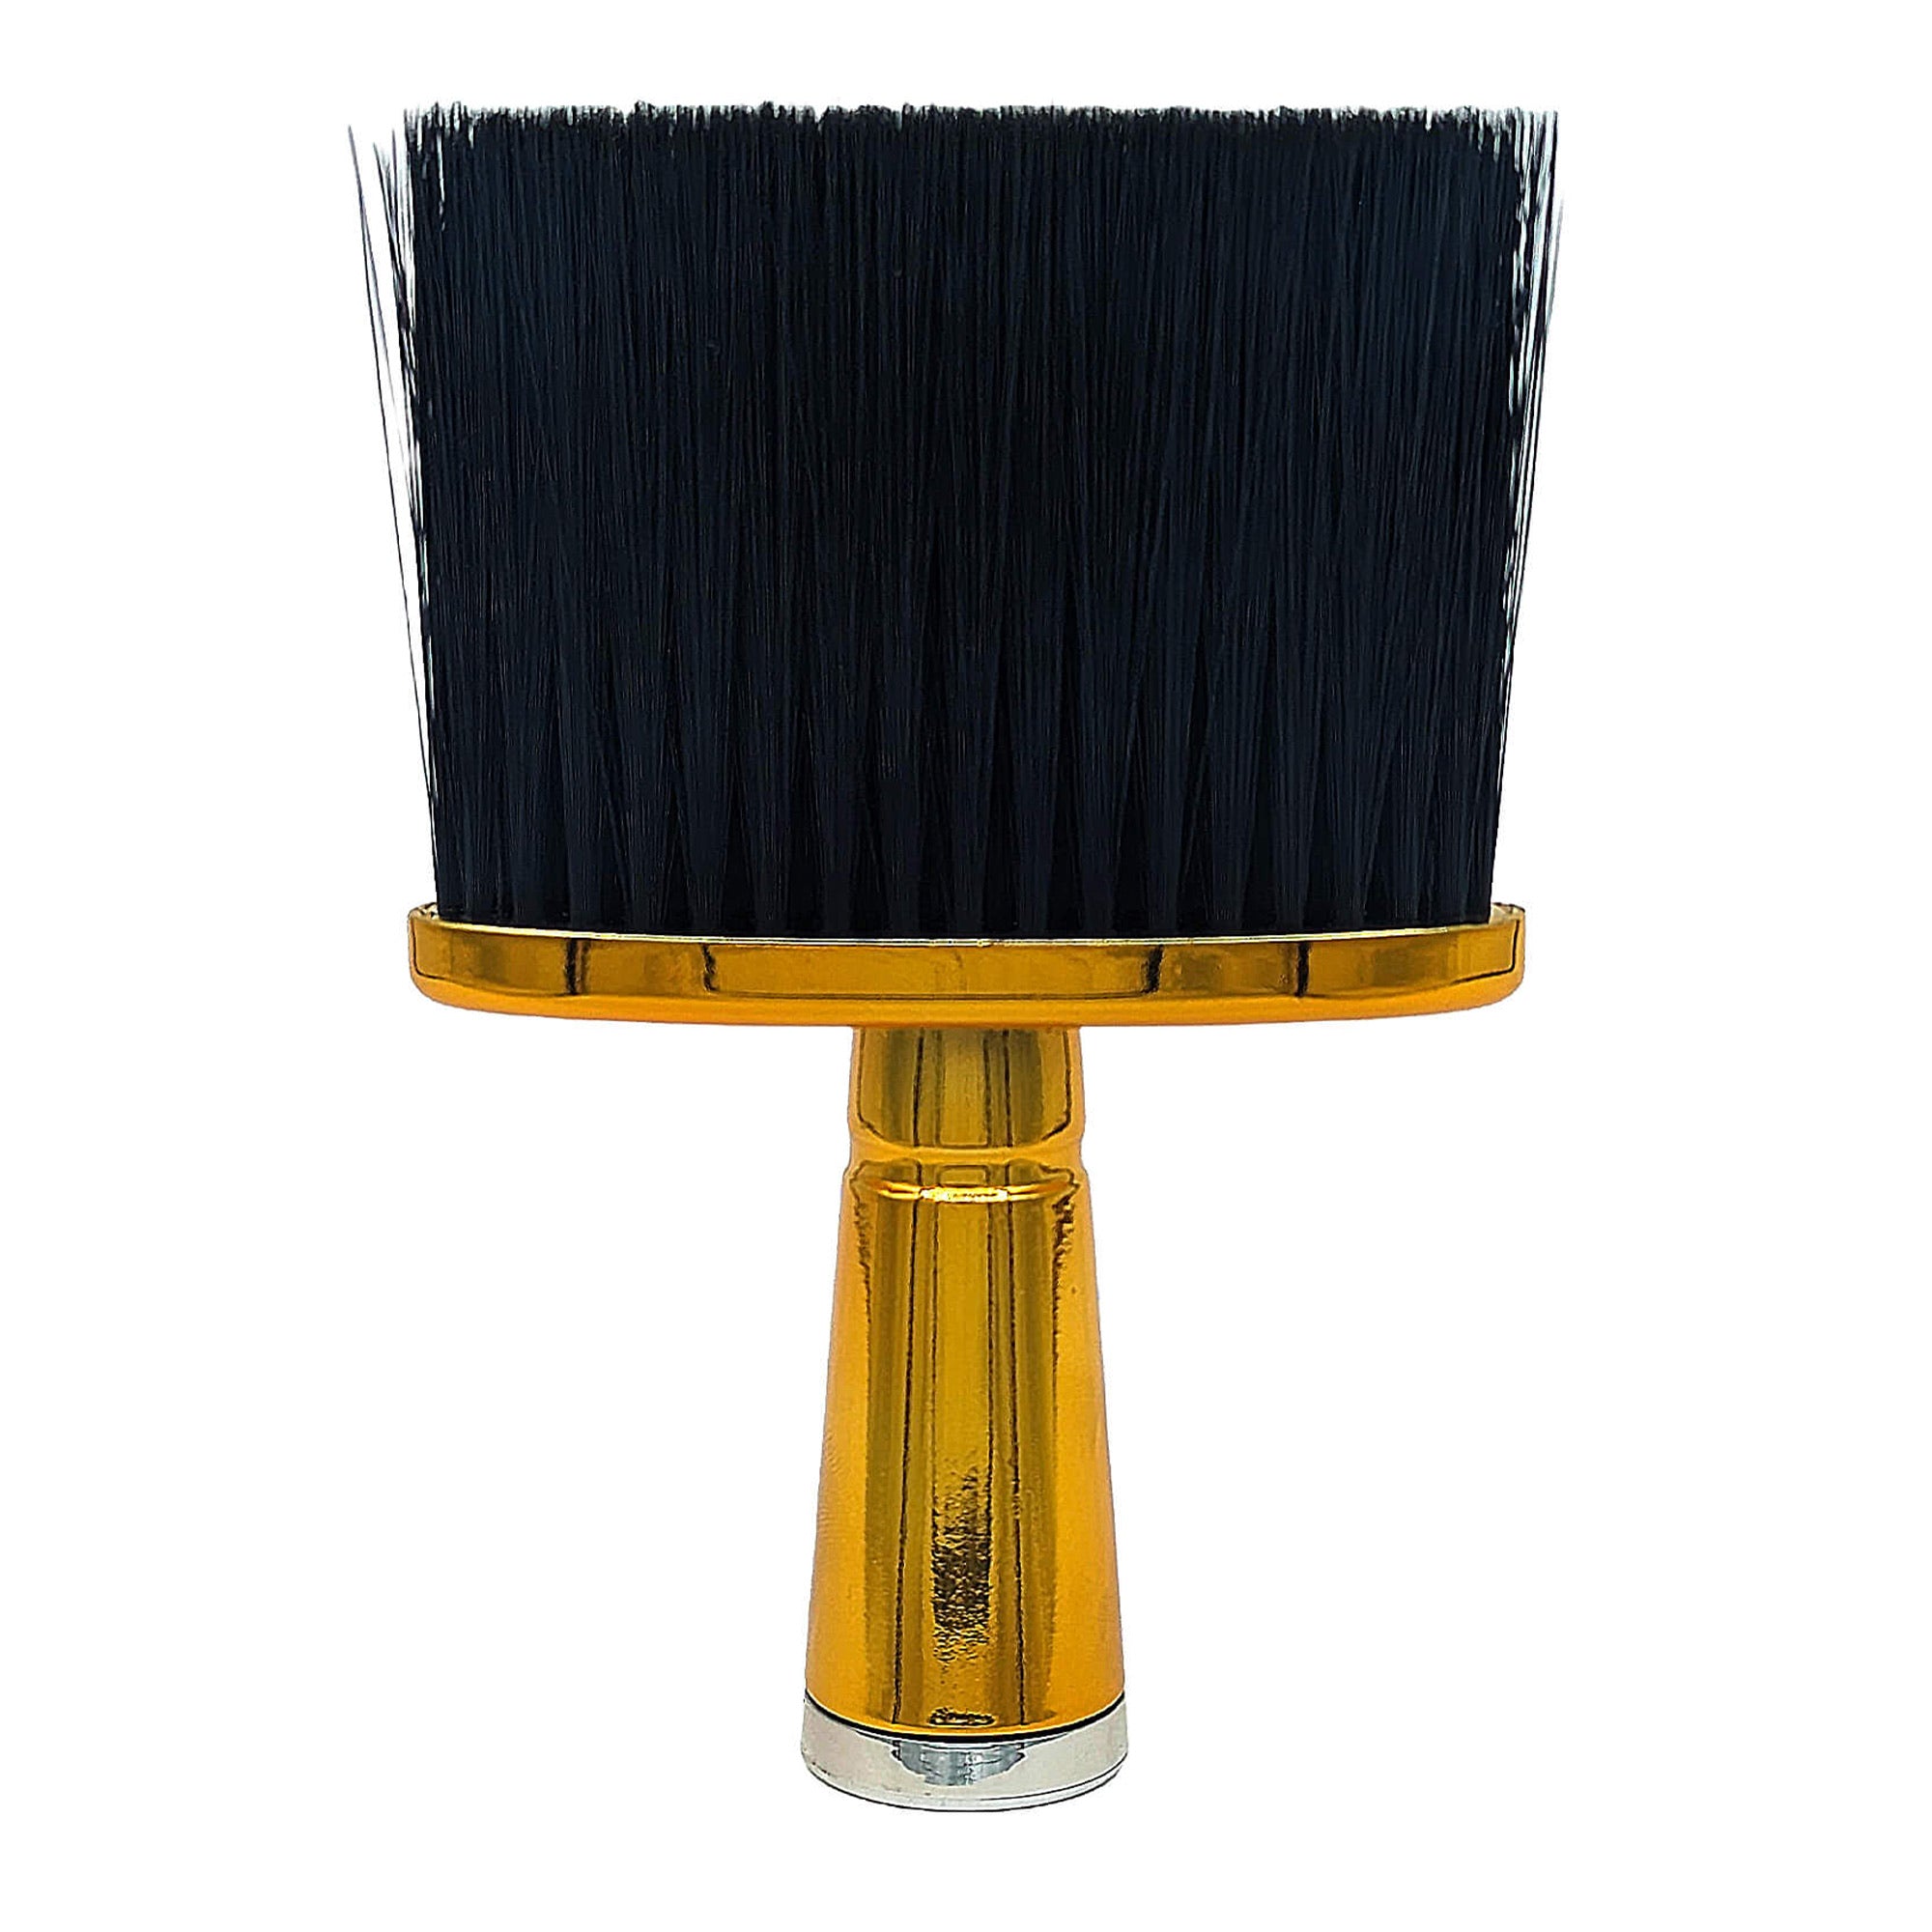 Eson - Neck Duster Brush Ultra-Soft Comfort During Use 15x10cm (Gold)